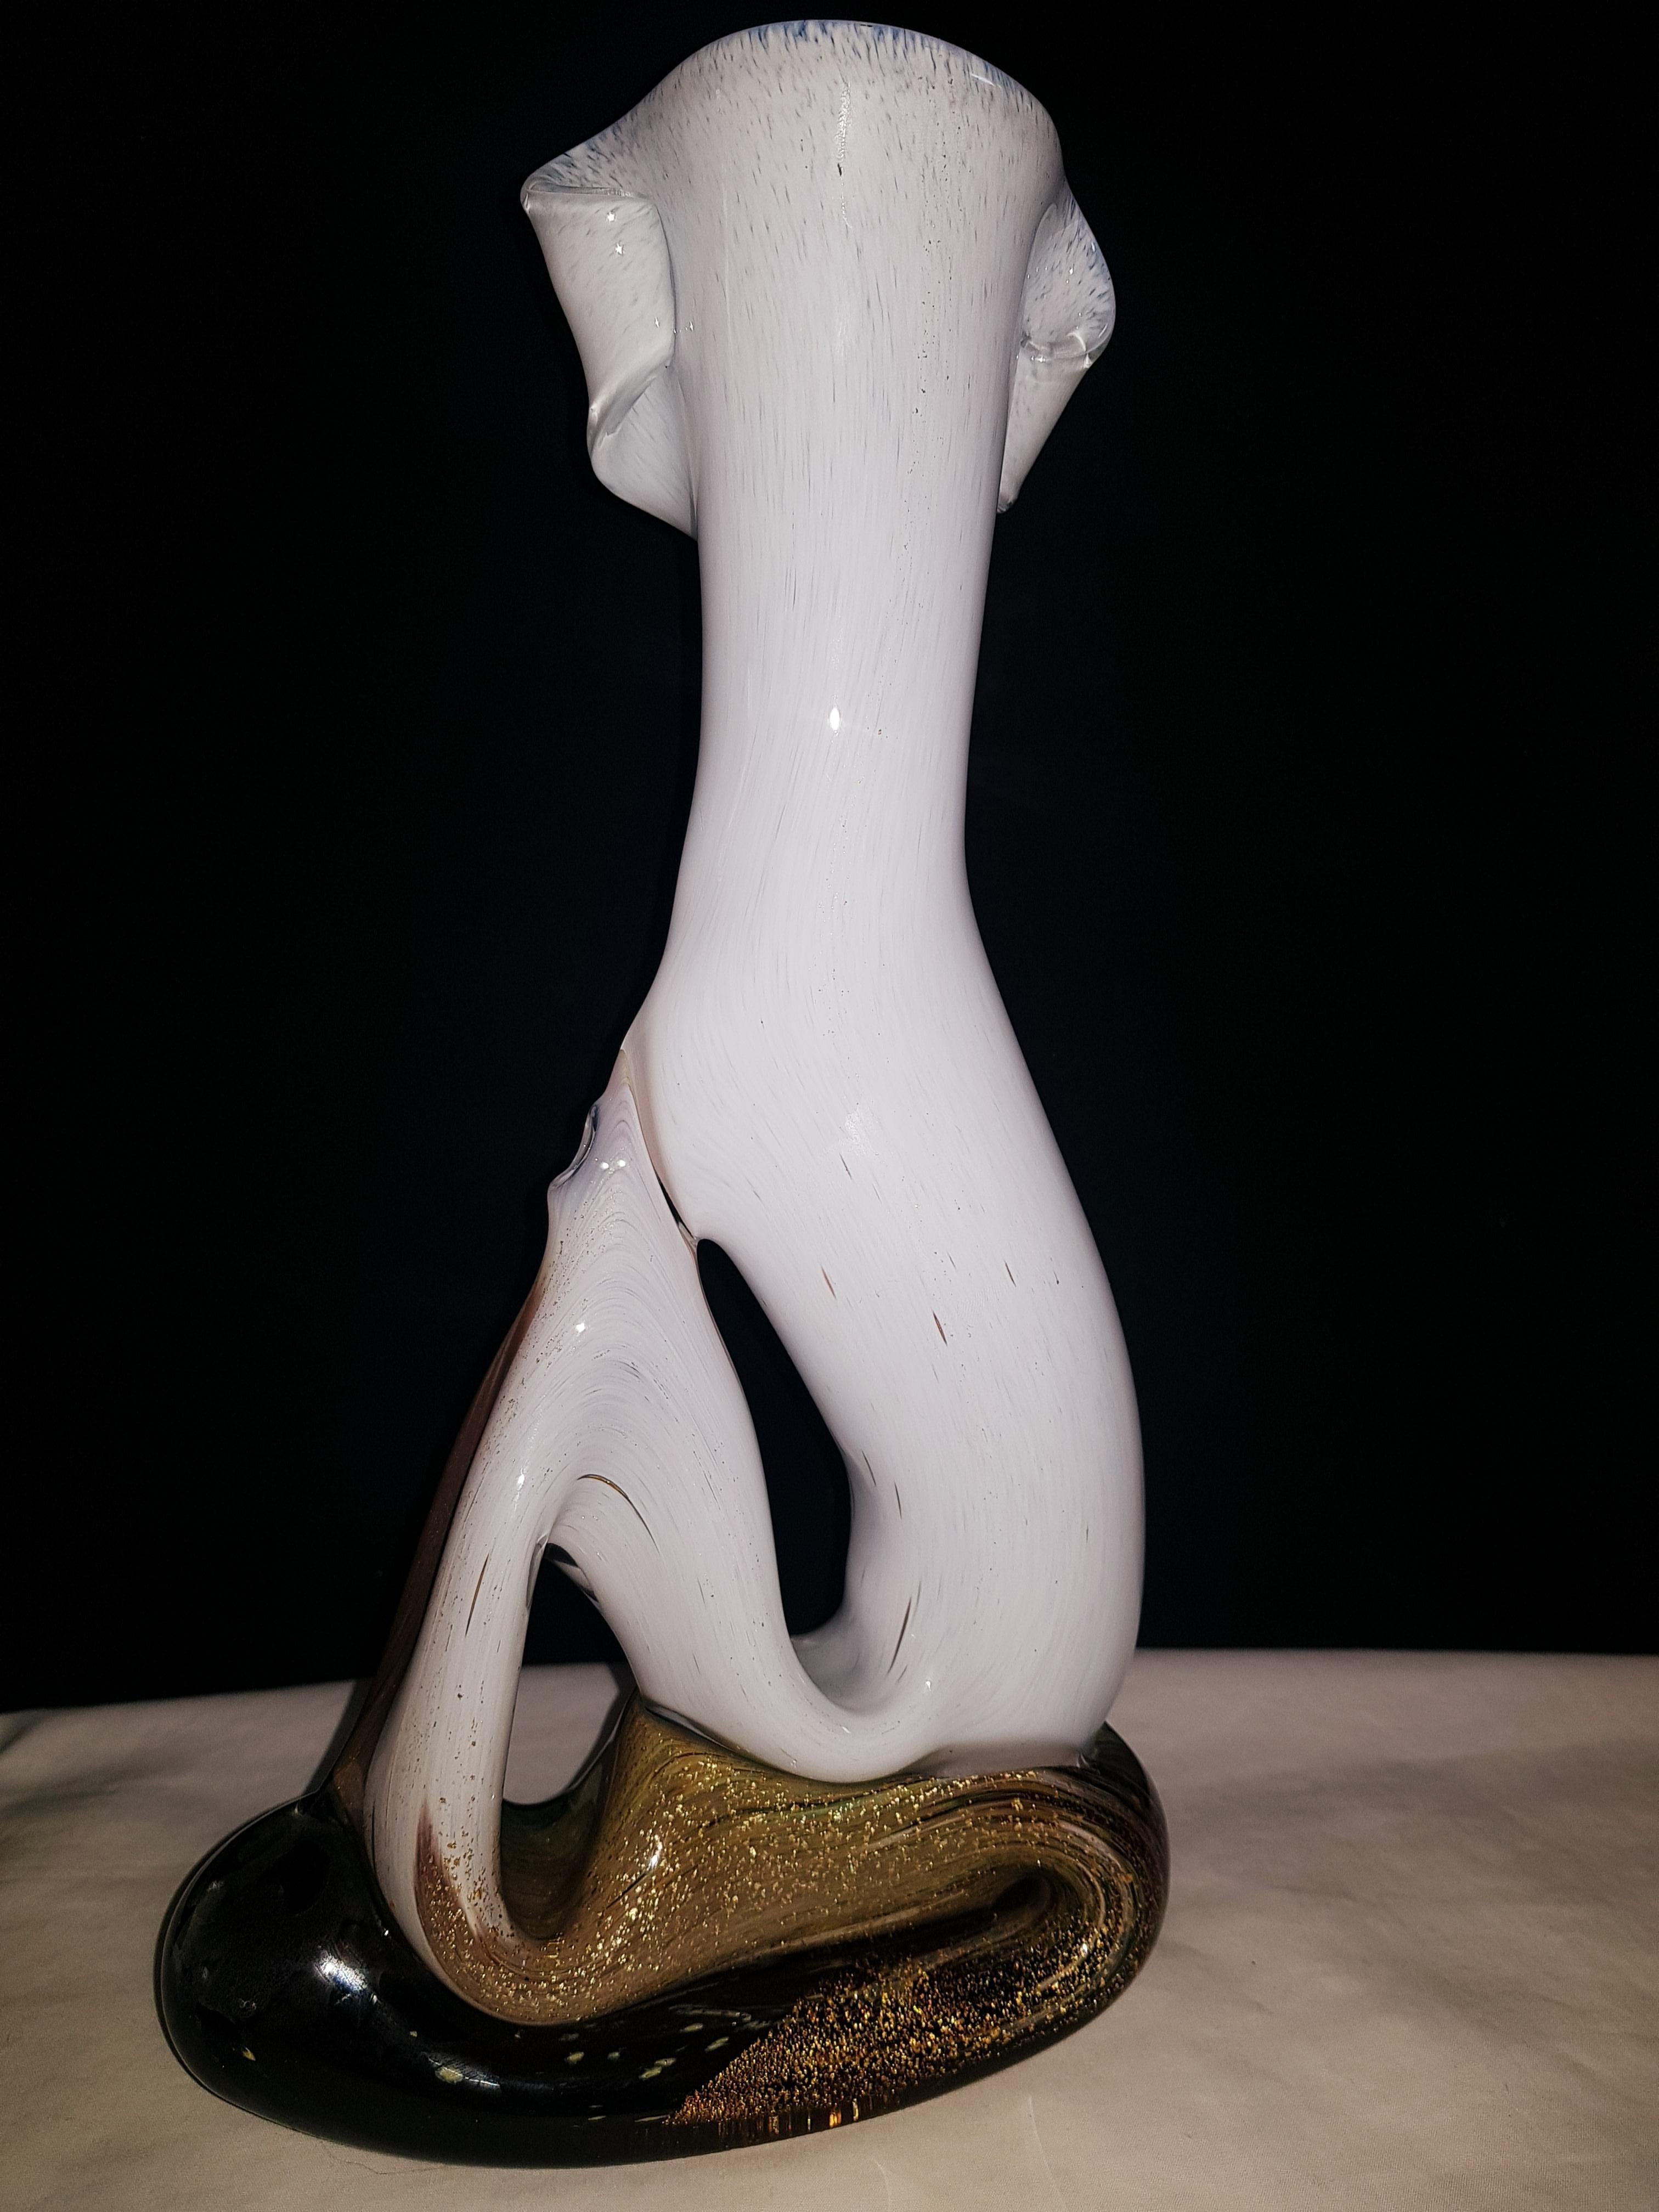 Middle of Century Murano Glass Vase with Gold Leaf In Excellent Condition For Sale In Grantham, GB